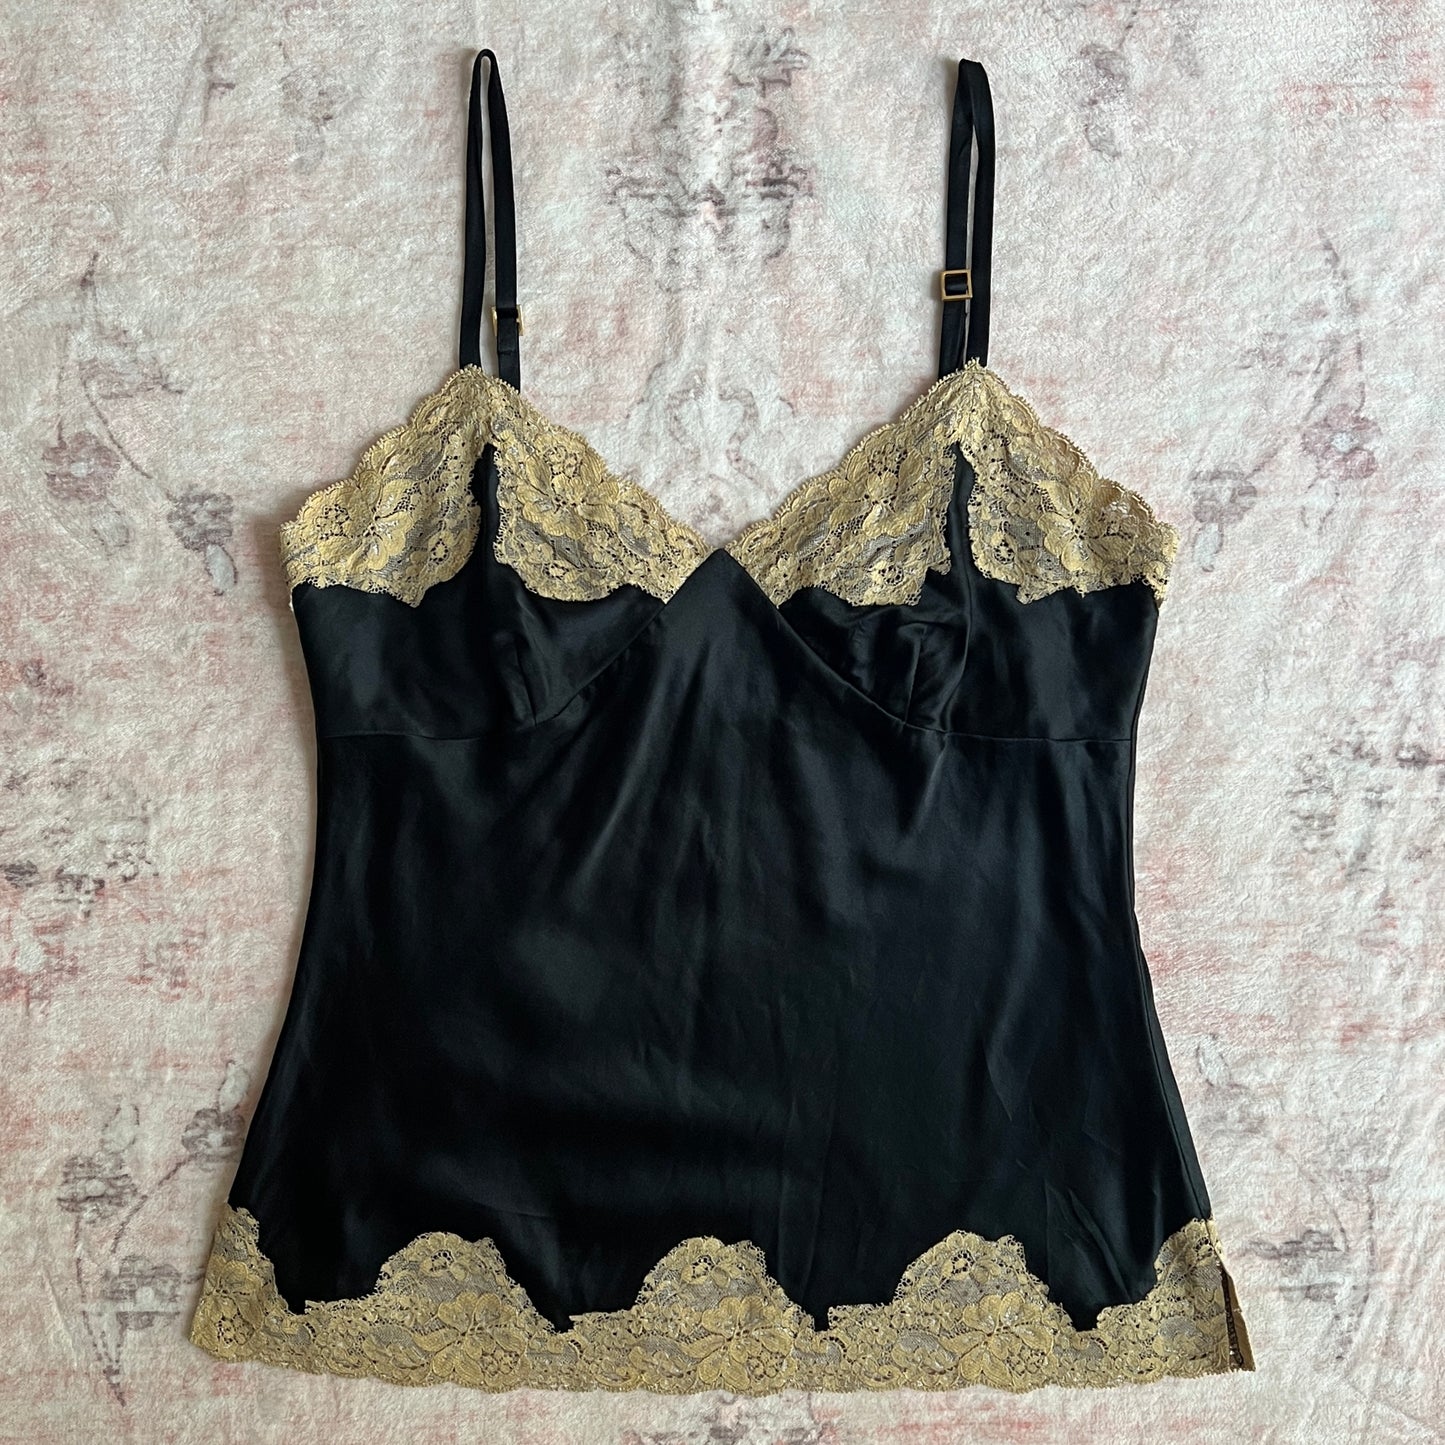 express black silk cami with lace details 𐙚 s